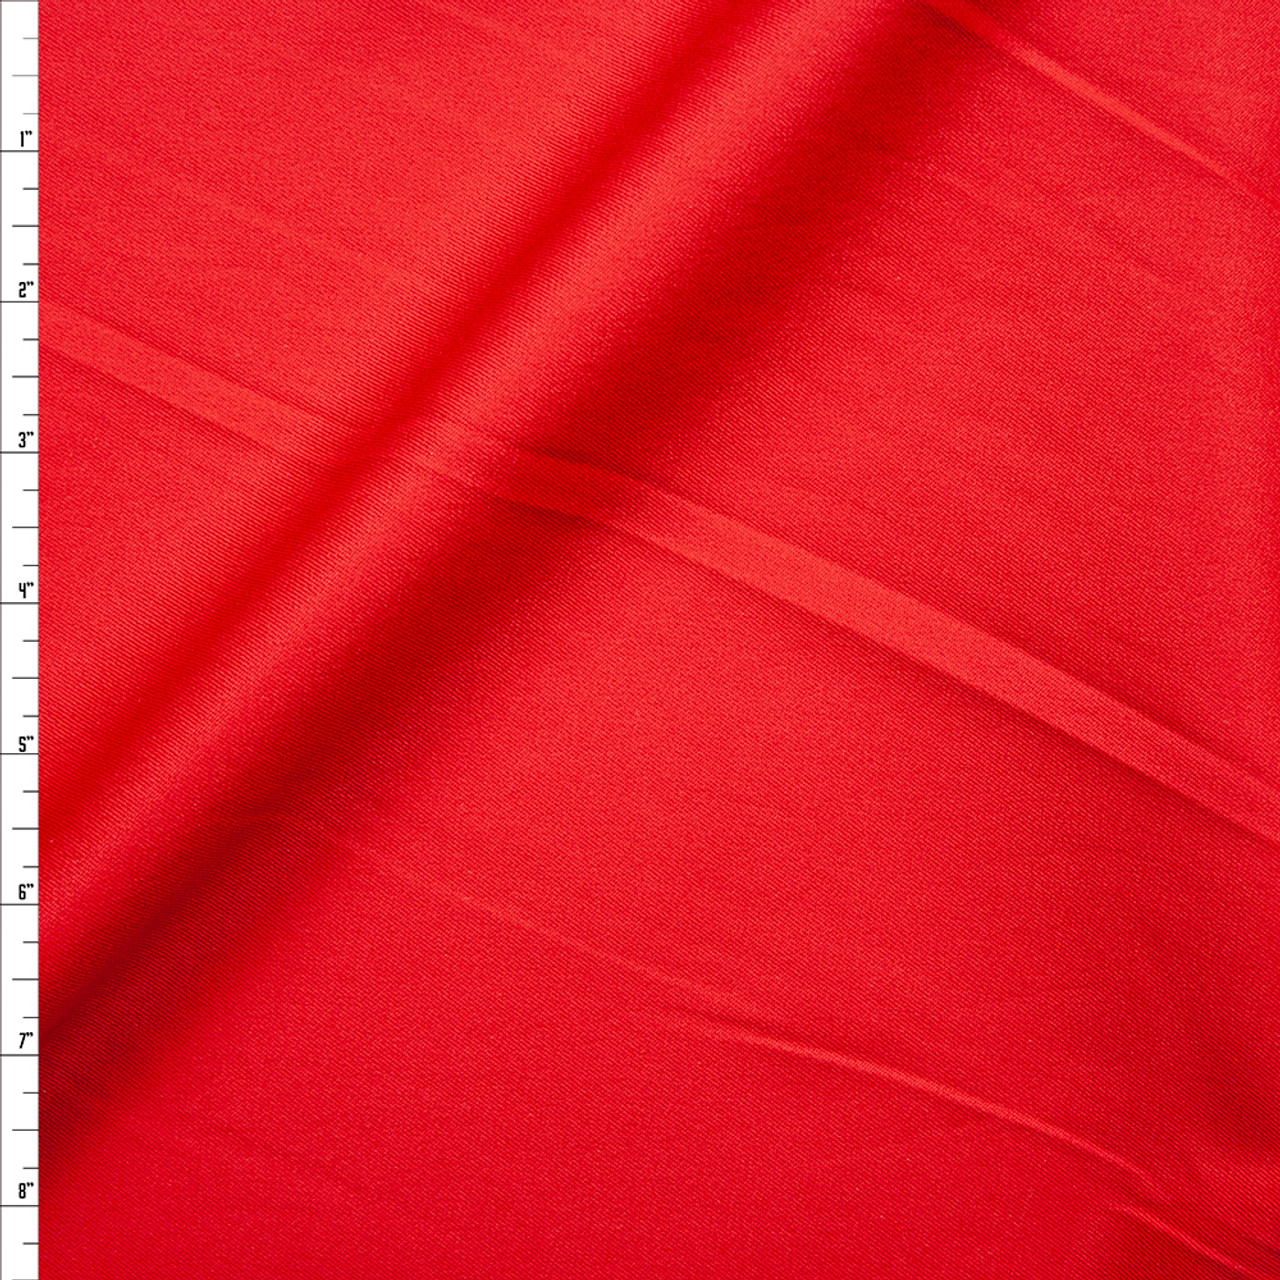 Cali Fabrics Red Stretch Midweight Cotton Twill Fabric by the Yard